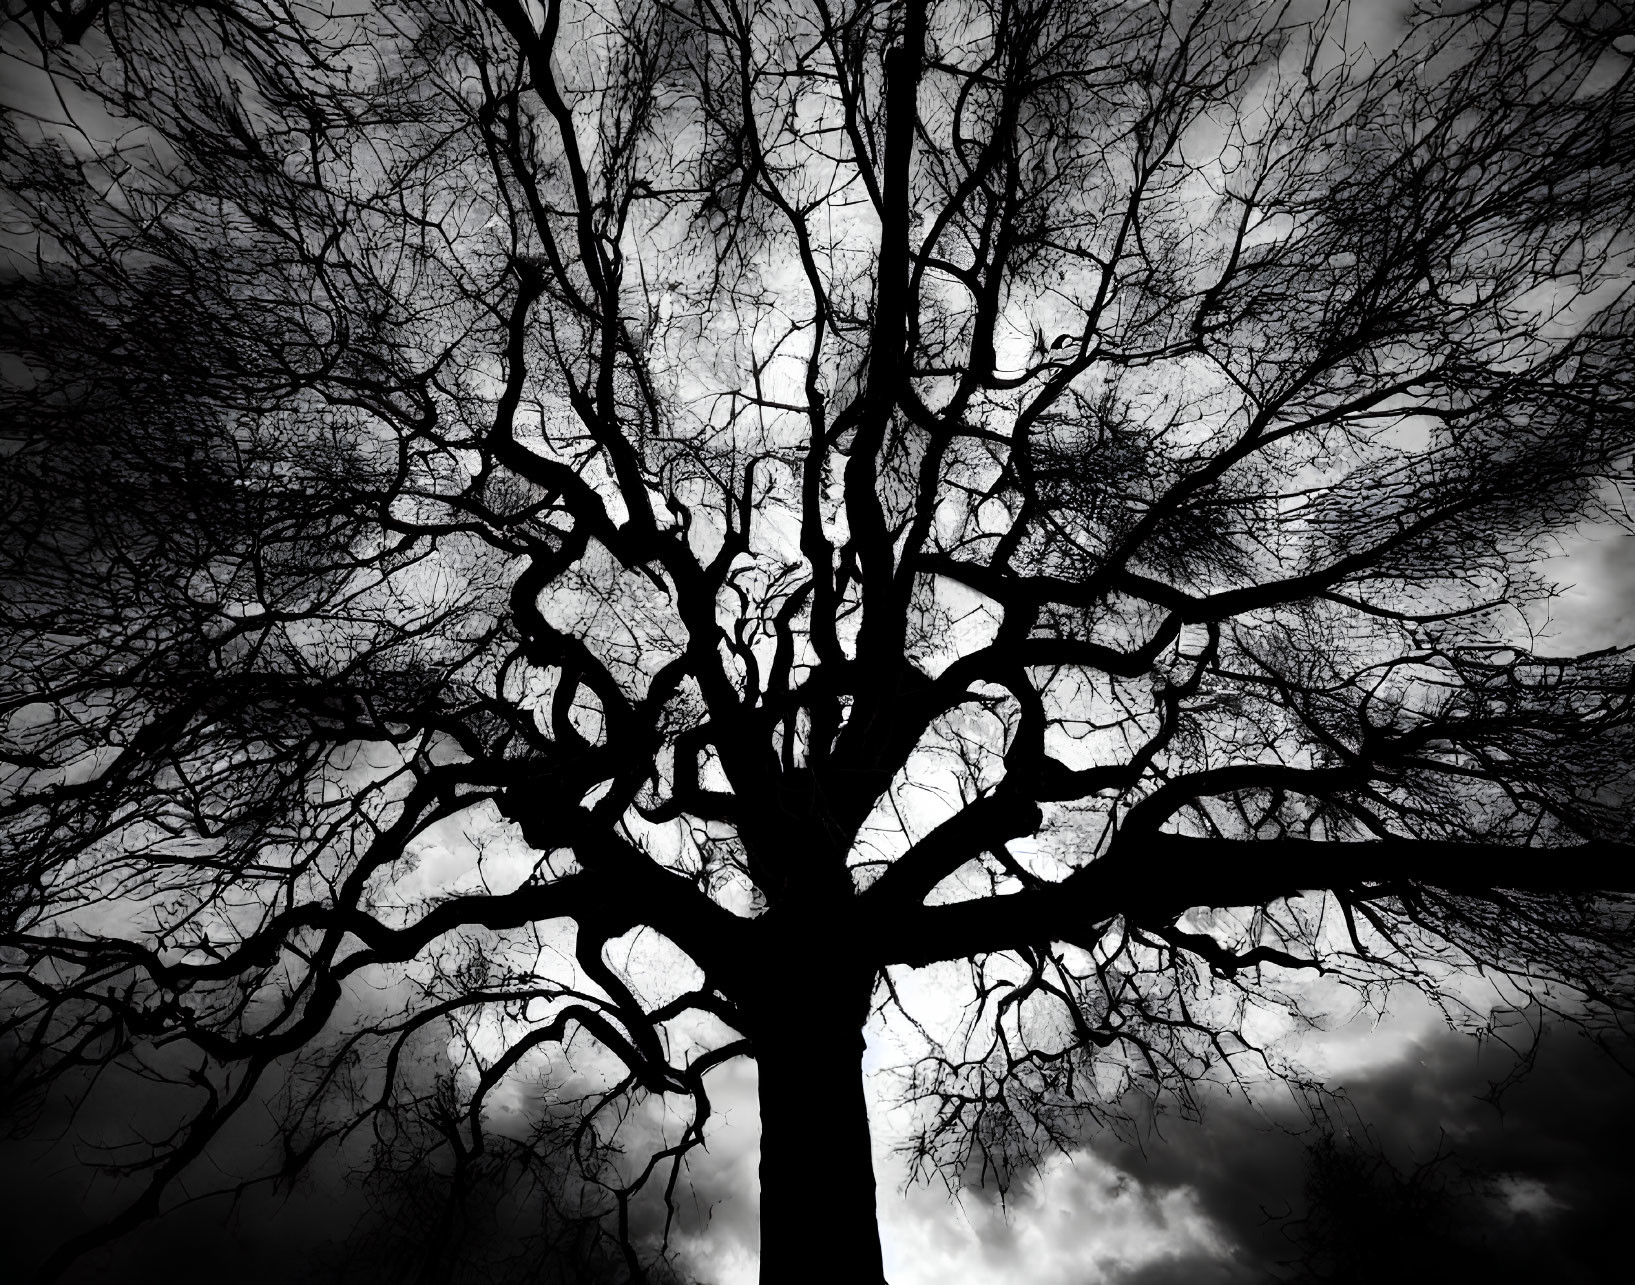 Leafless Tree Silhouette Against Cloudy Sky: Moody and Dramatic Atmosphere